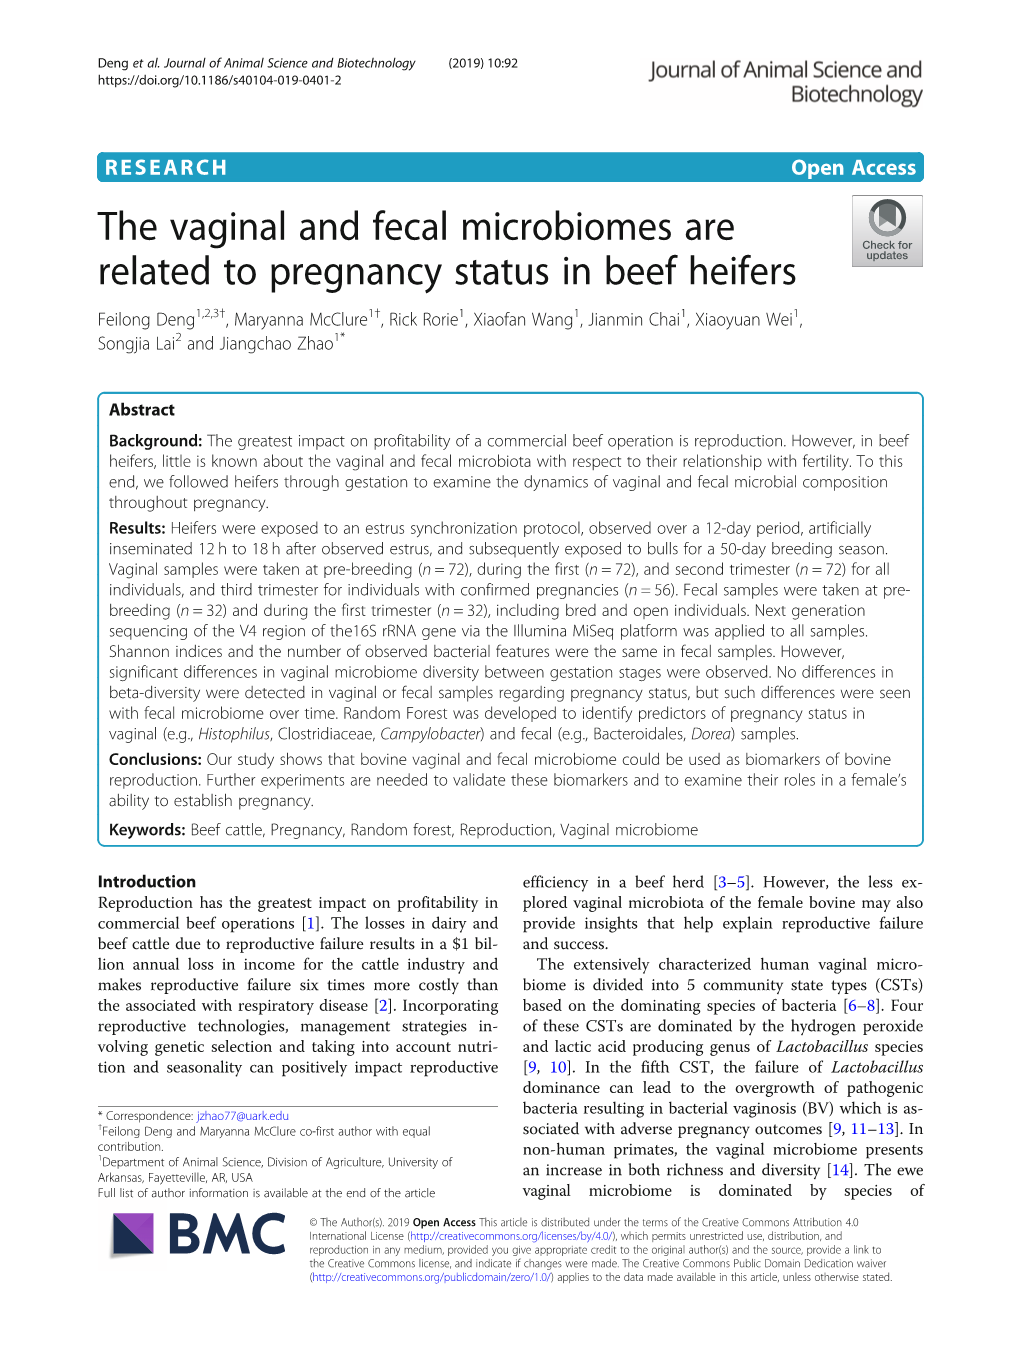 The Vaginal and Fecal Microbiomes Are Related to Pregnancy Status In